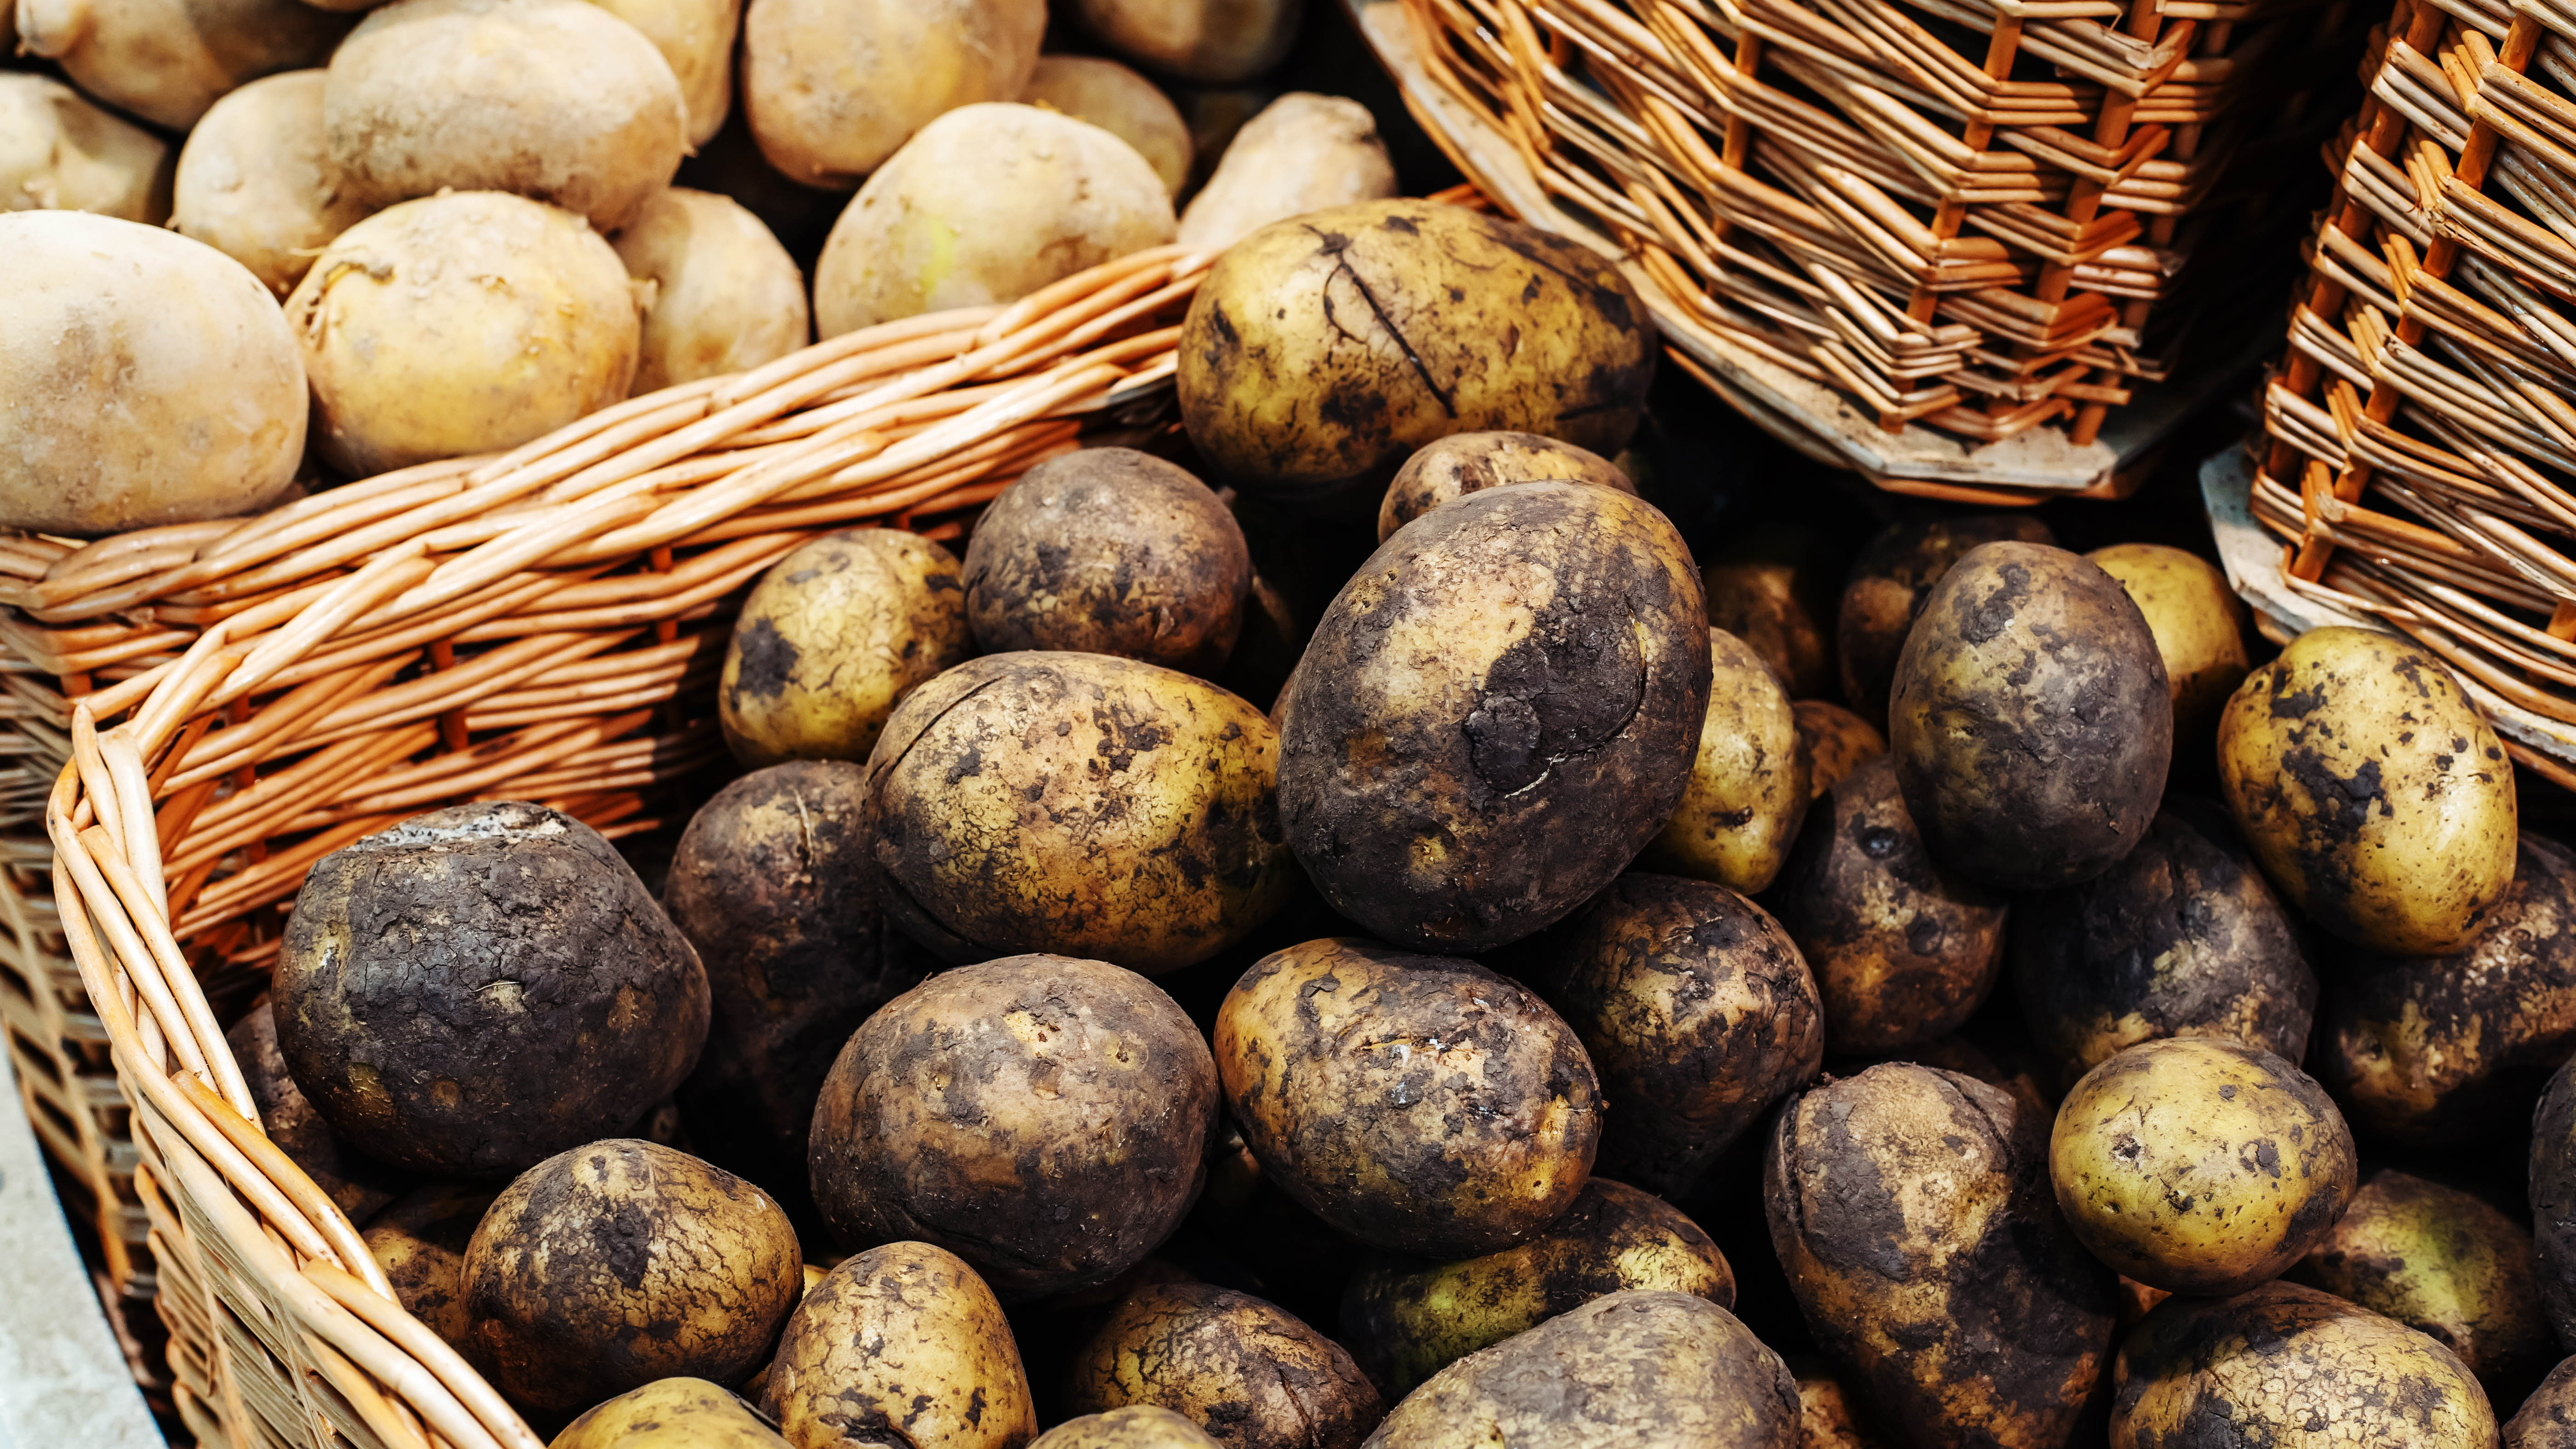 Dirty potatoes piled up in a basket